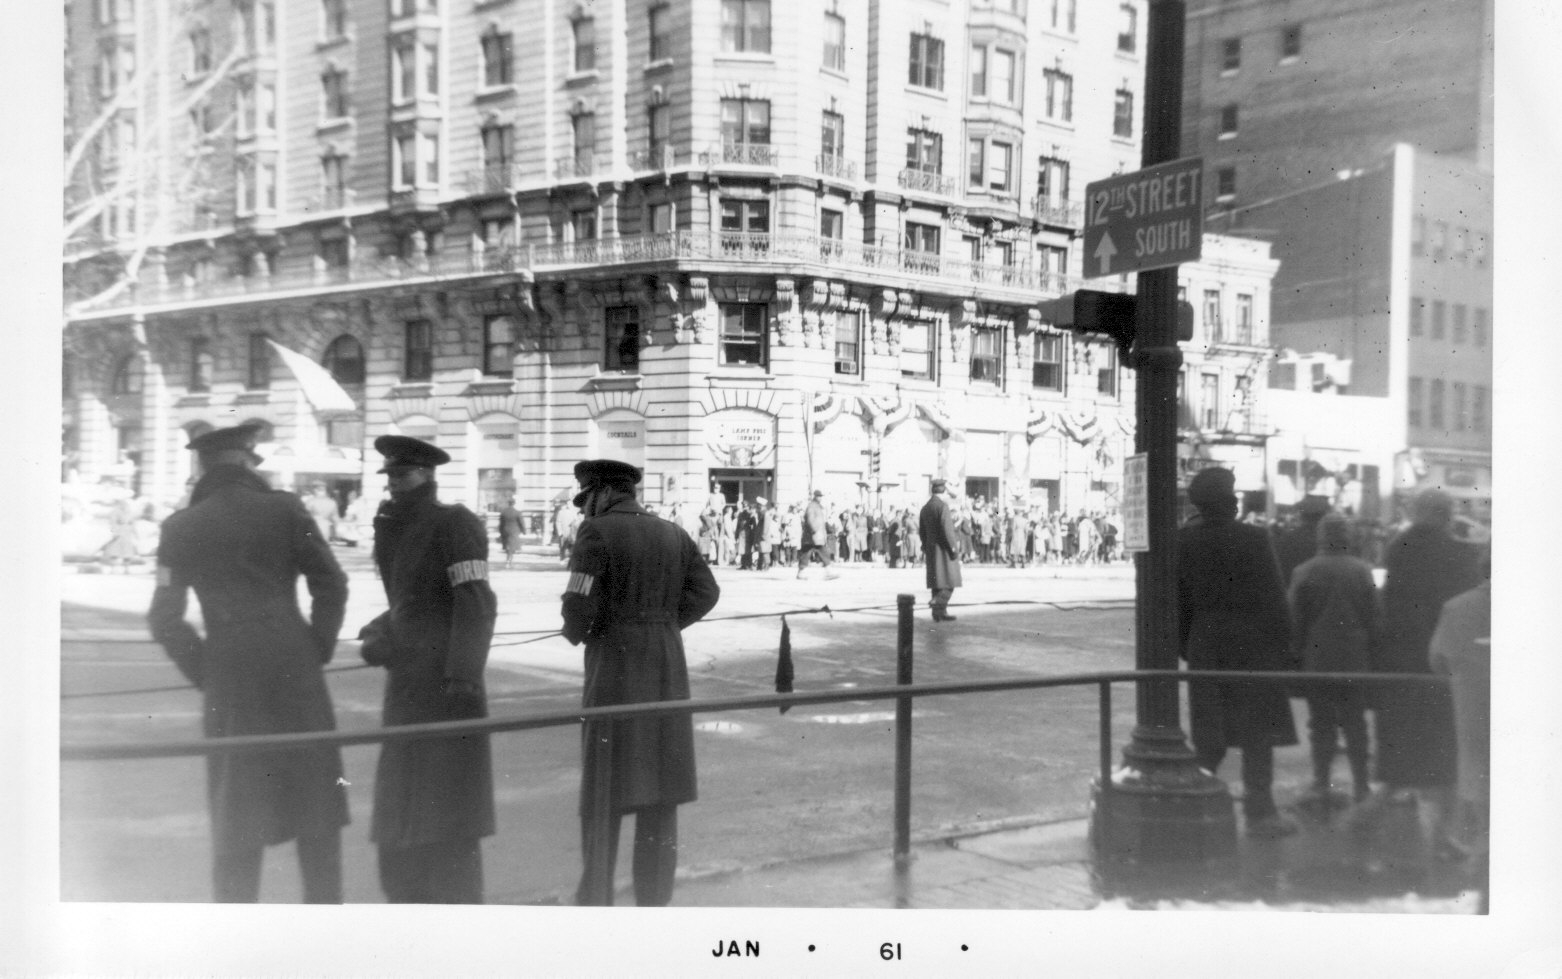 President Kennedy’s Inauguration Parade, 1961.  Photo is from a private collection, on loan to the ACC for their private use.  No reproduction or use of this photo is permitted.